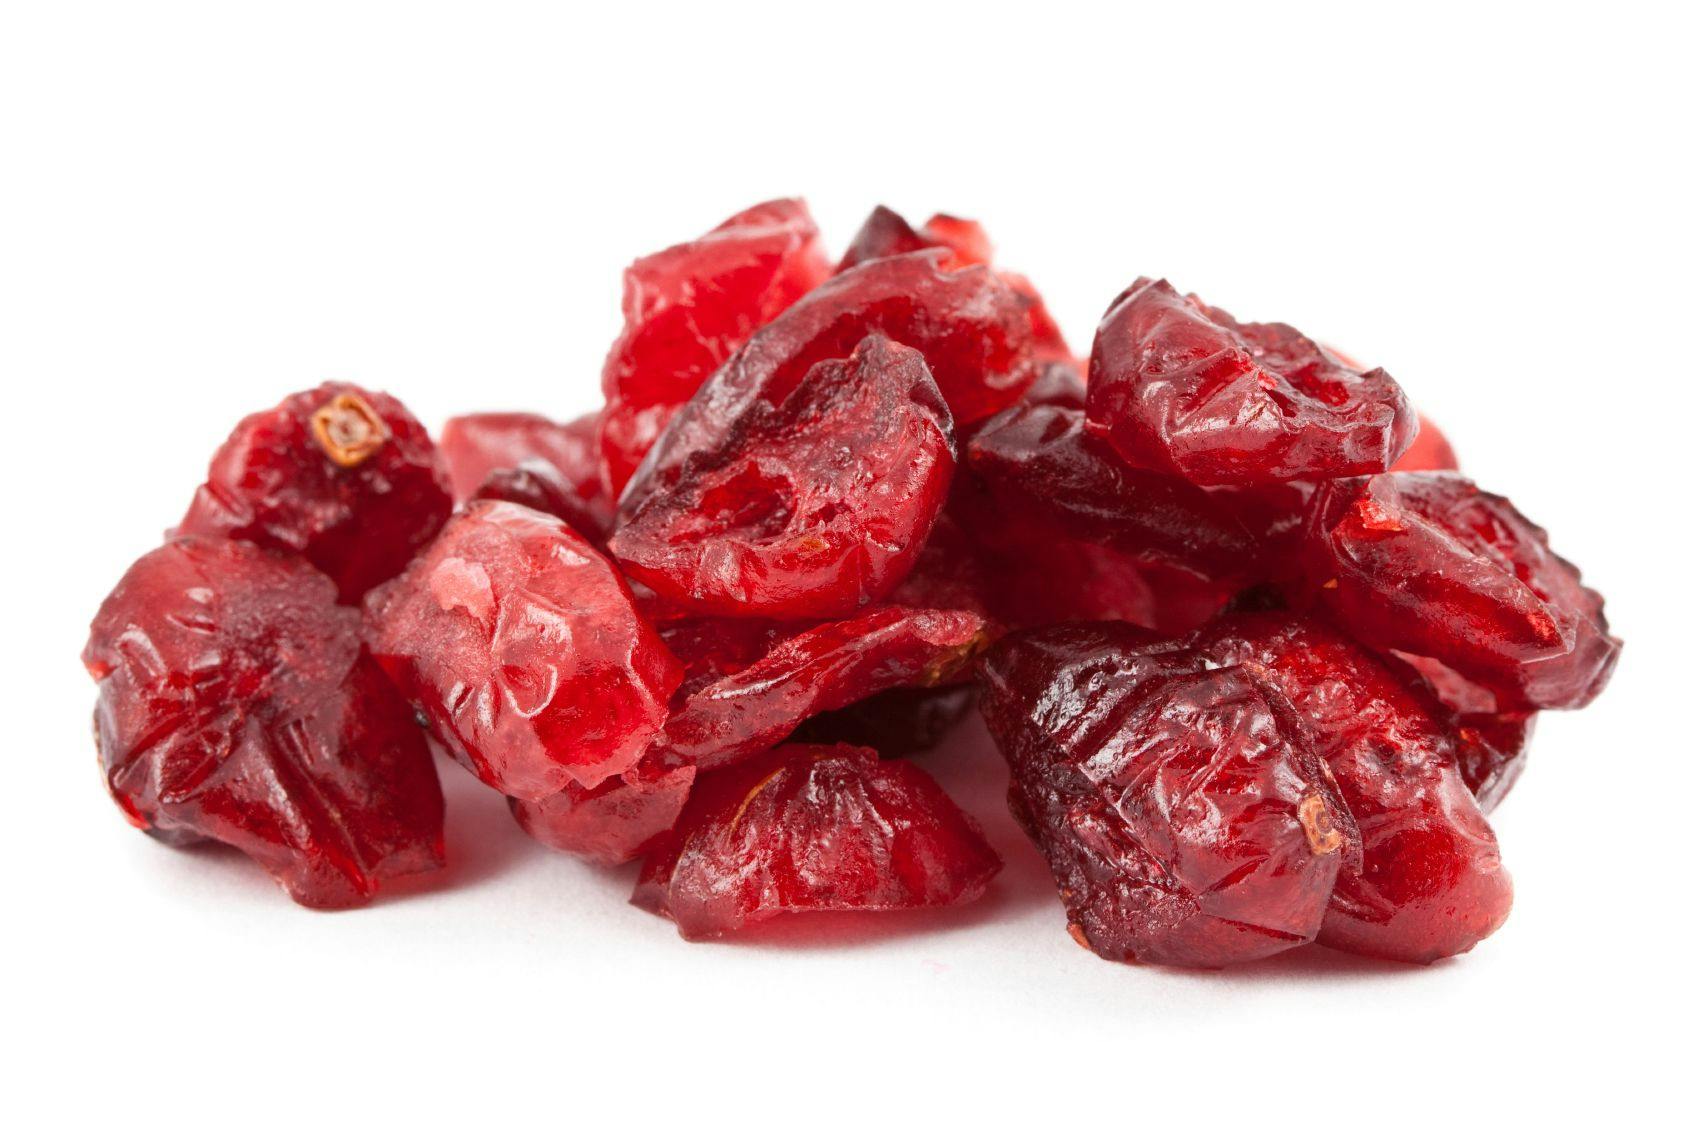 Cranberry Supplements Have Variable PAC Contents